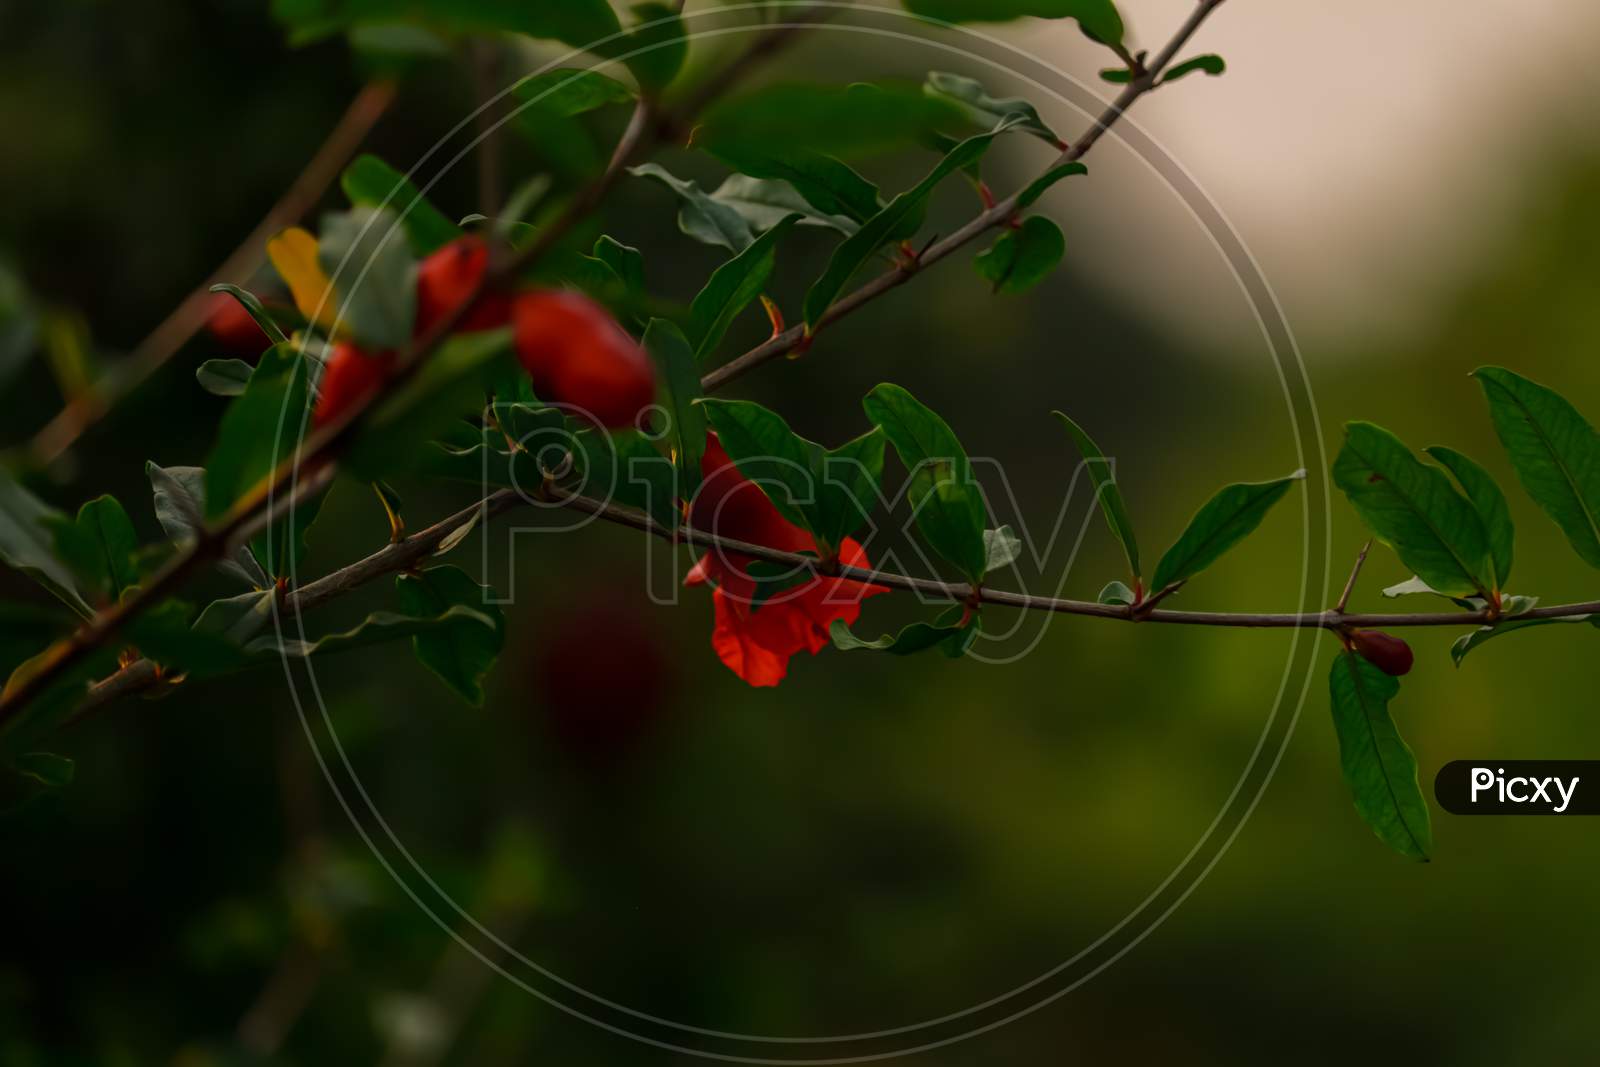 Ripe Pomegranate Fruit On Tree Branch, Pomegranate Garden Hd Footage Clip With Selective Focus,Red Ripe Pomegranate Fruit On Tree Branch In The Garden